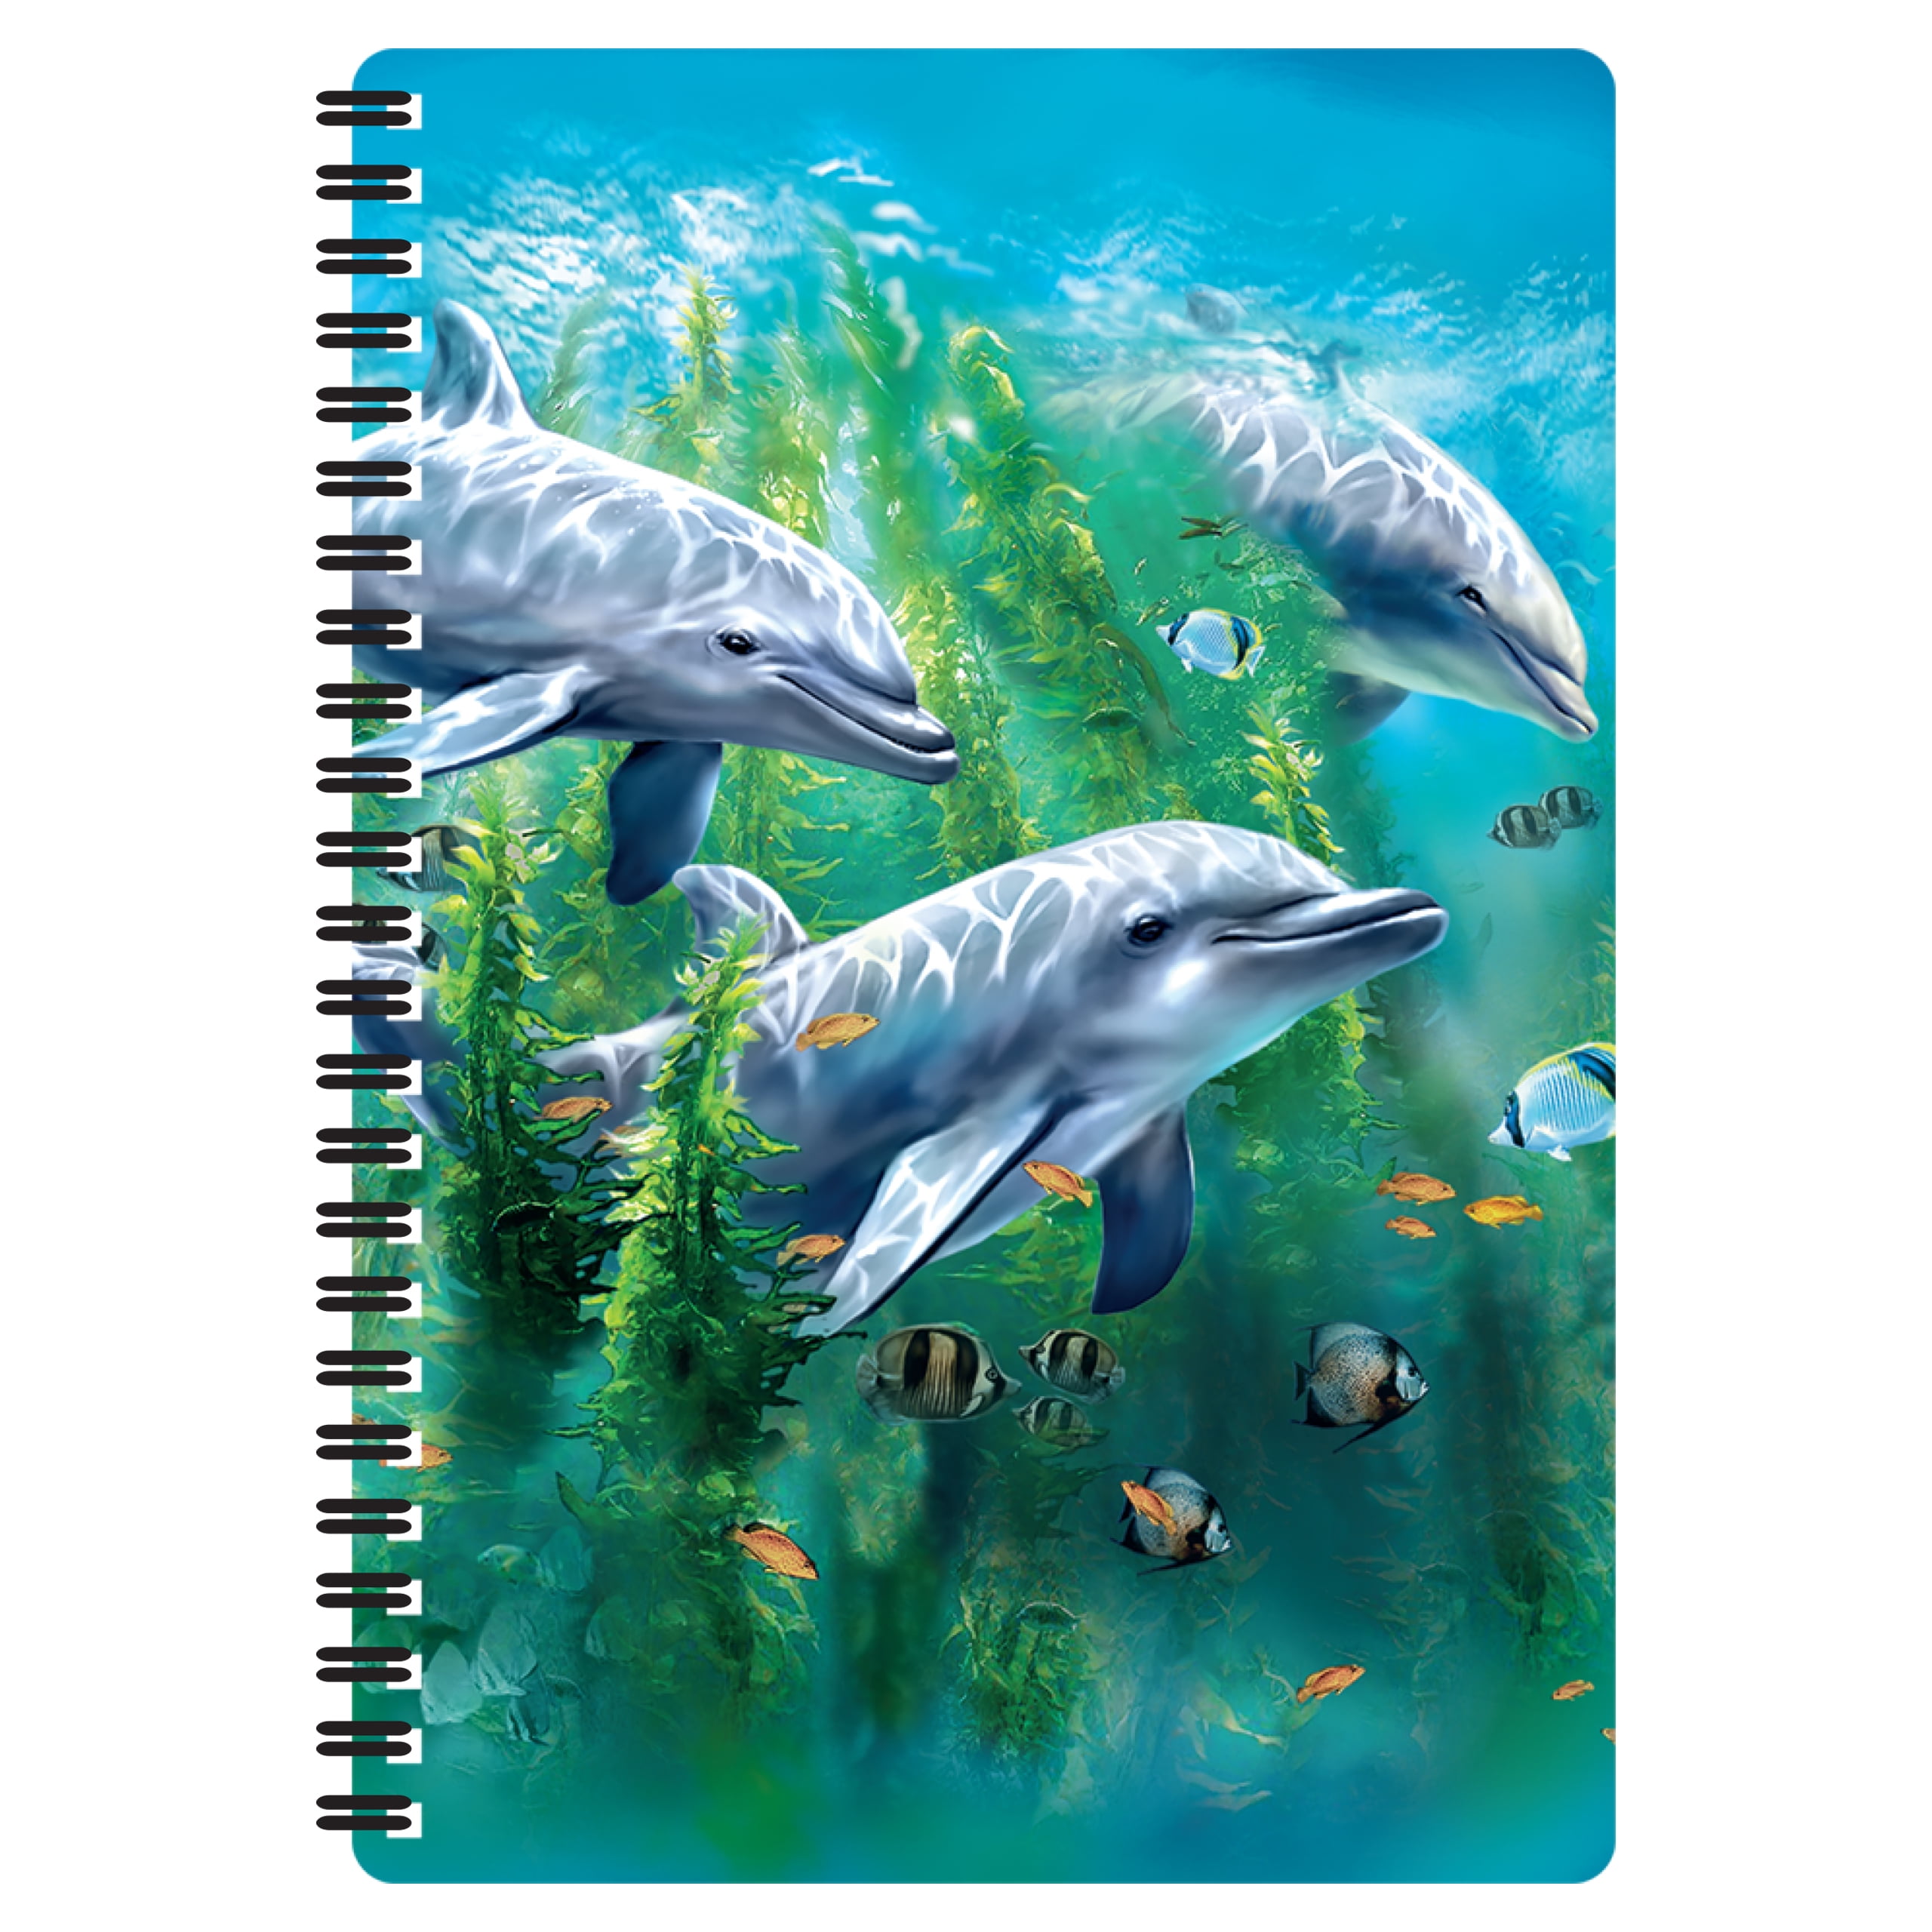 3D LiveLife Notebook - Dolphin Kelp Bed from Deluxebase. 80 Page Lined ...